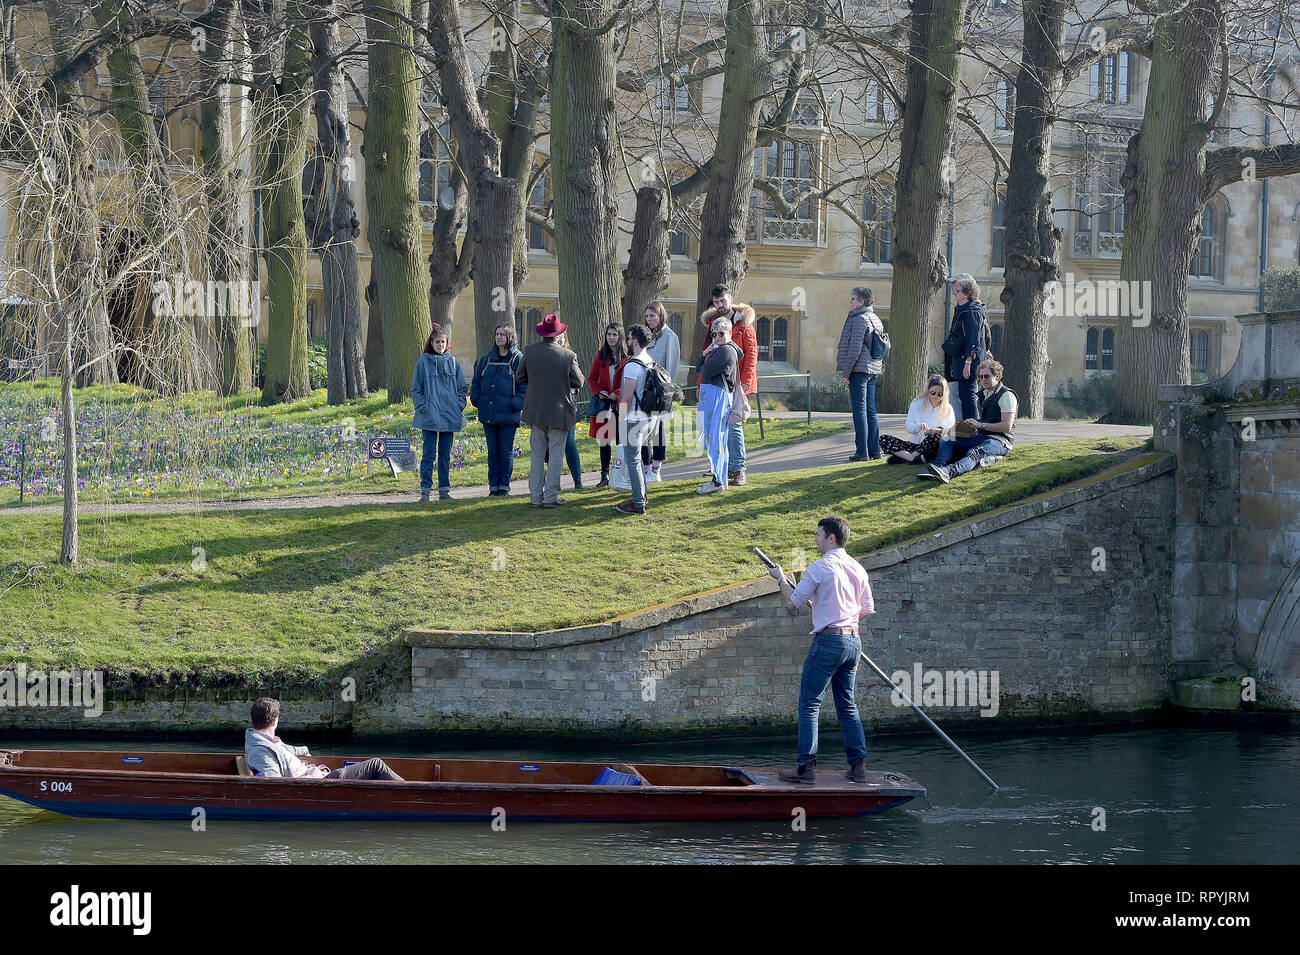 Cambridge, UK. 23rd Feb 2018. As most of the UK basks in near record breaking February temperatures visitors to Cambridge make the most of the weather by taking to punts on the Cities famous Rivers. Credit: MARTIN DALTON/Alamy Live News Stock Photo